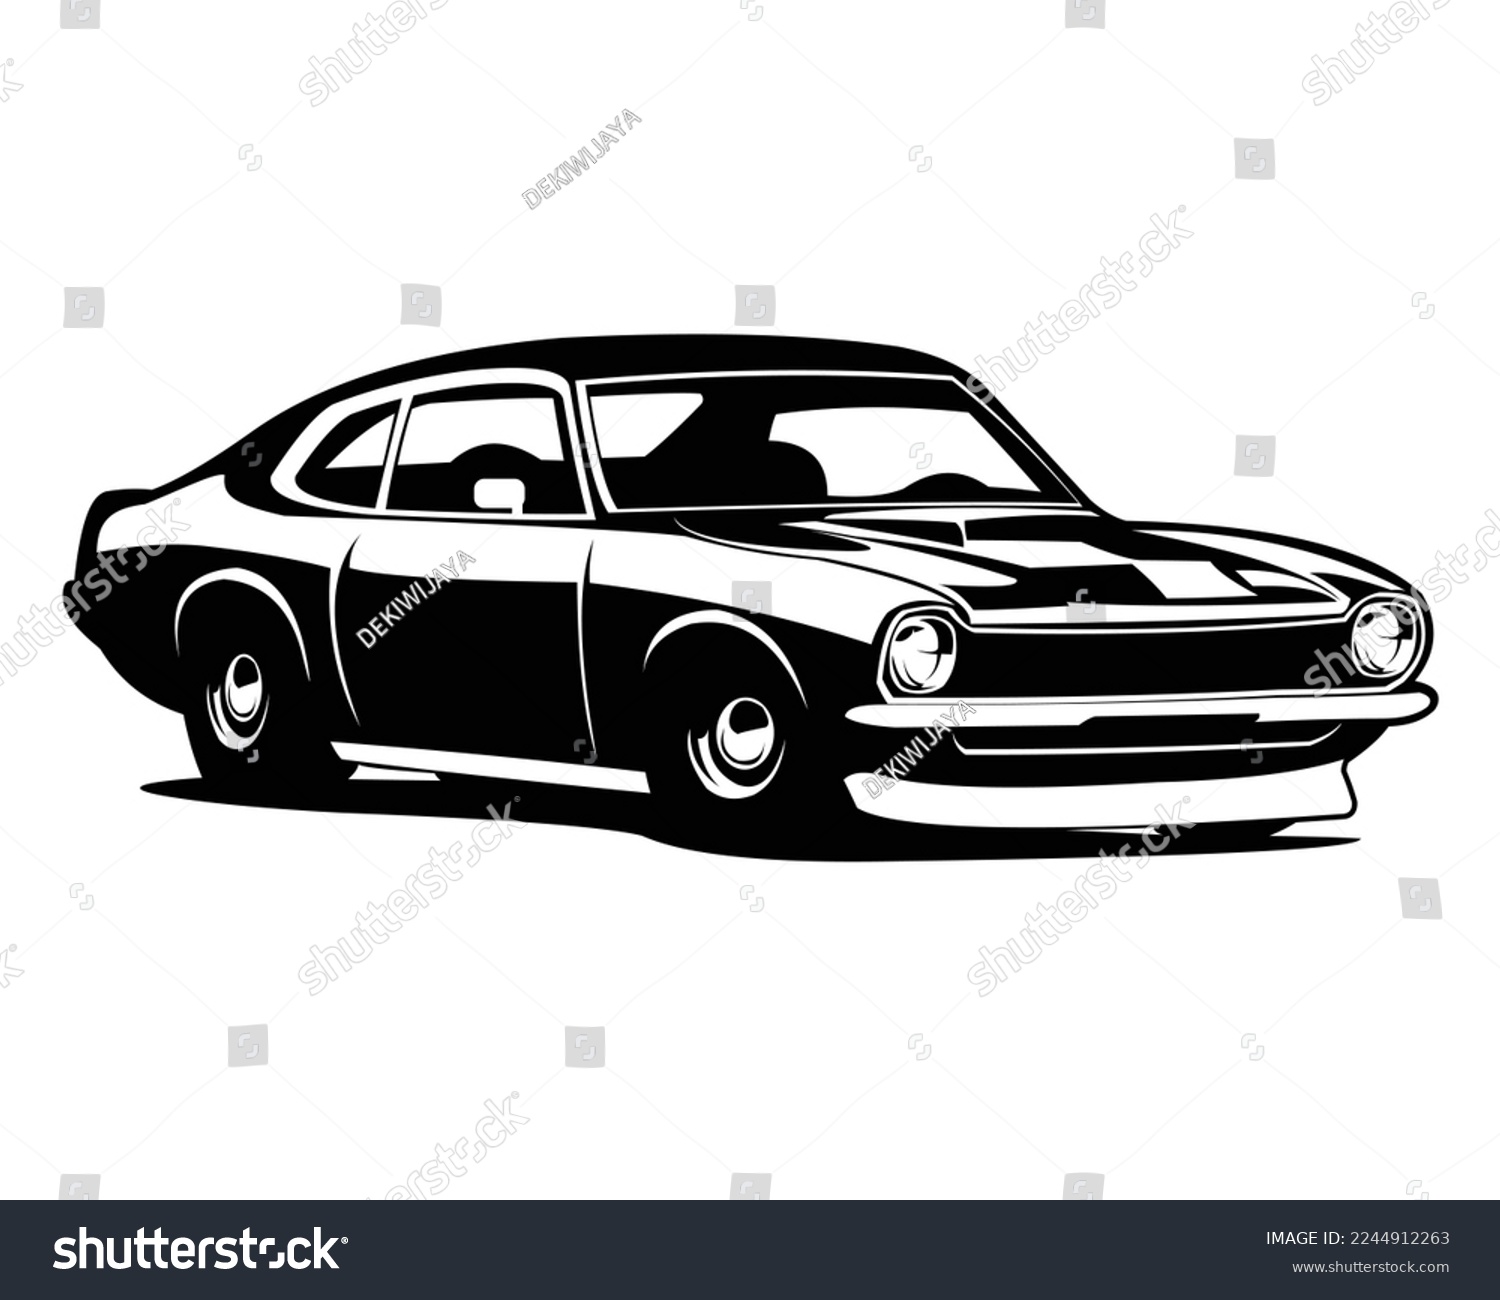 SVG of chevy camaro car silhouette. isolated white background view from side. best for logos, badges, emblems. svg